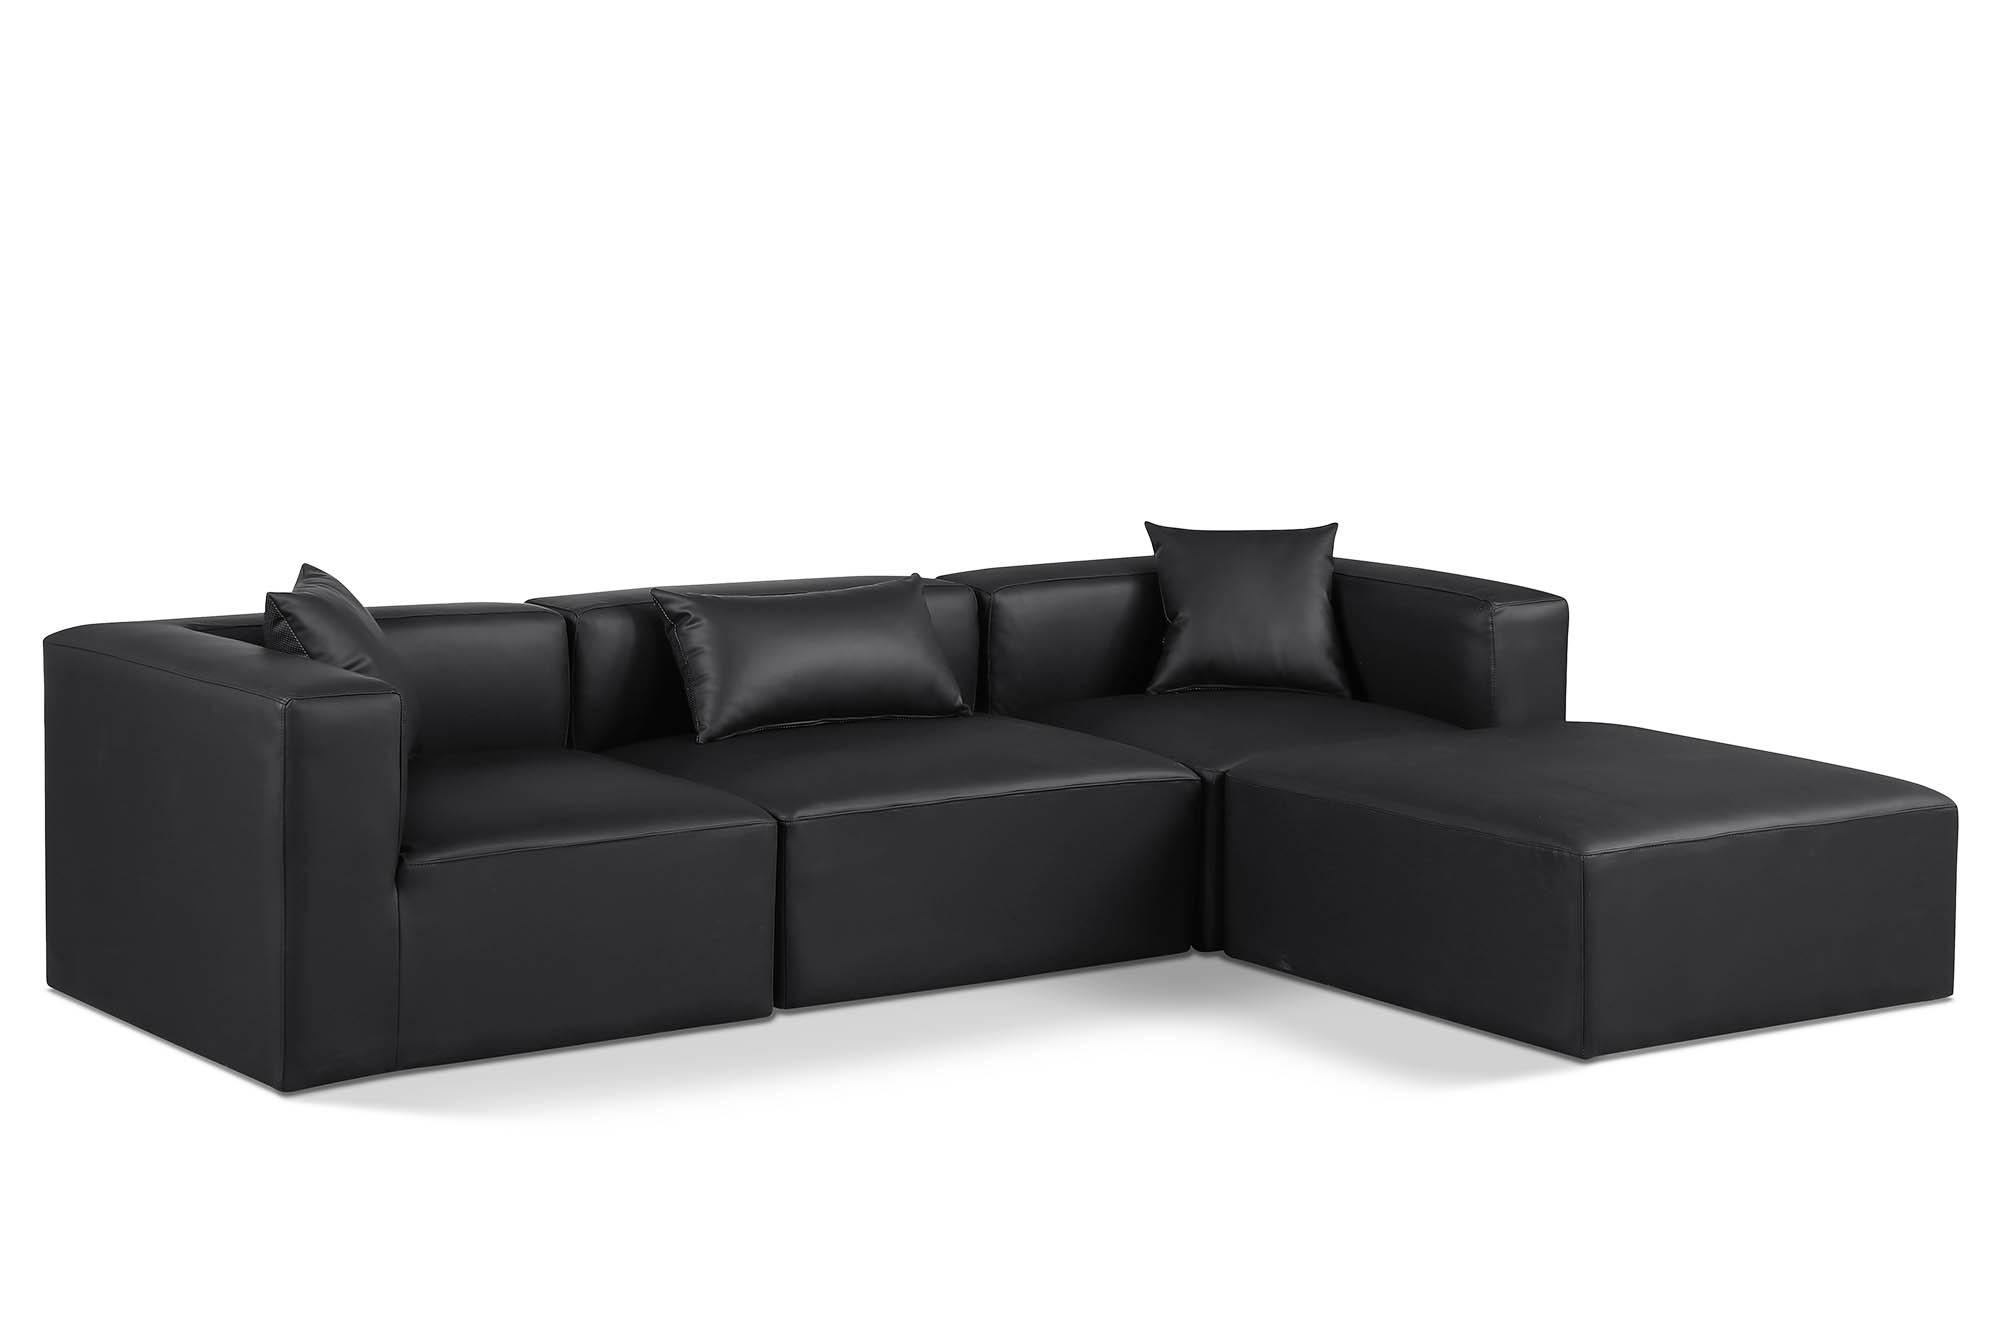 Contemporary, Modern Modular Sectional Sofa CUBE 668Black-Sec4A 668Black-Sec4A in Black Faux Leather